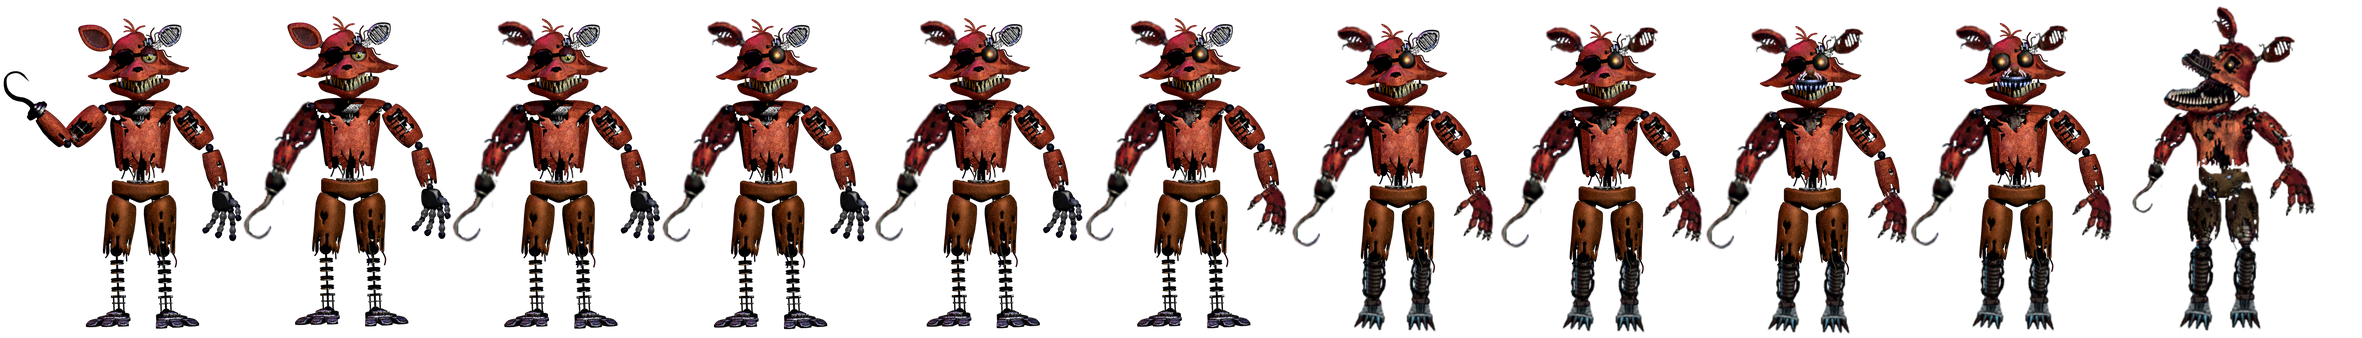 FNAF Character Sheet #9 - Withered Foxy : r/fivenightsatfreddys